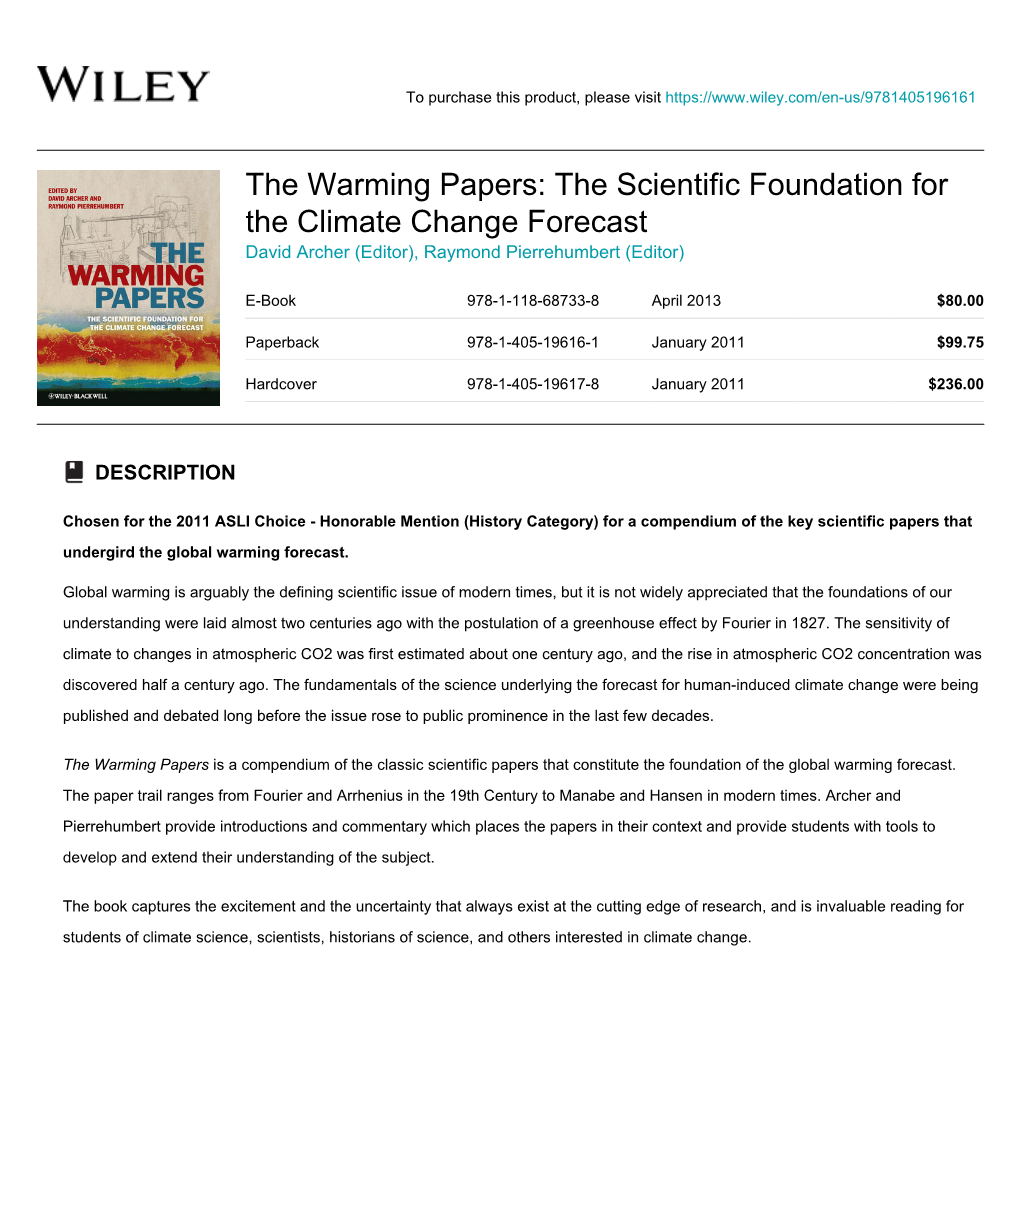 The Scientific Foundation for the Climate Change Forecast David Archer (Editor), Raymond Pierrehumbert (Editor)